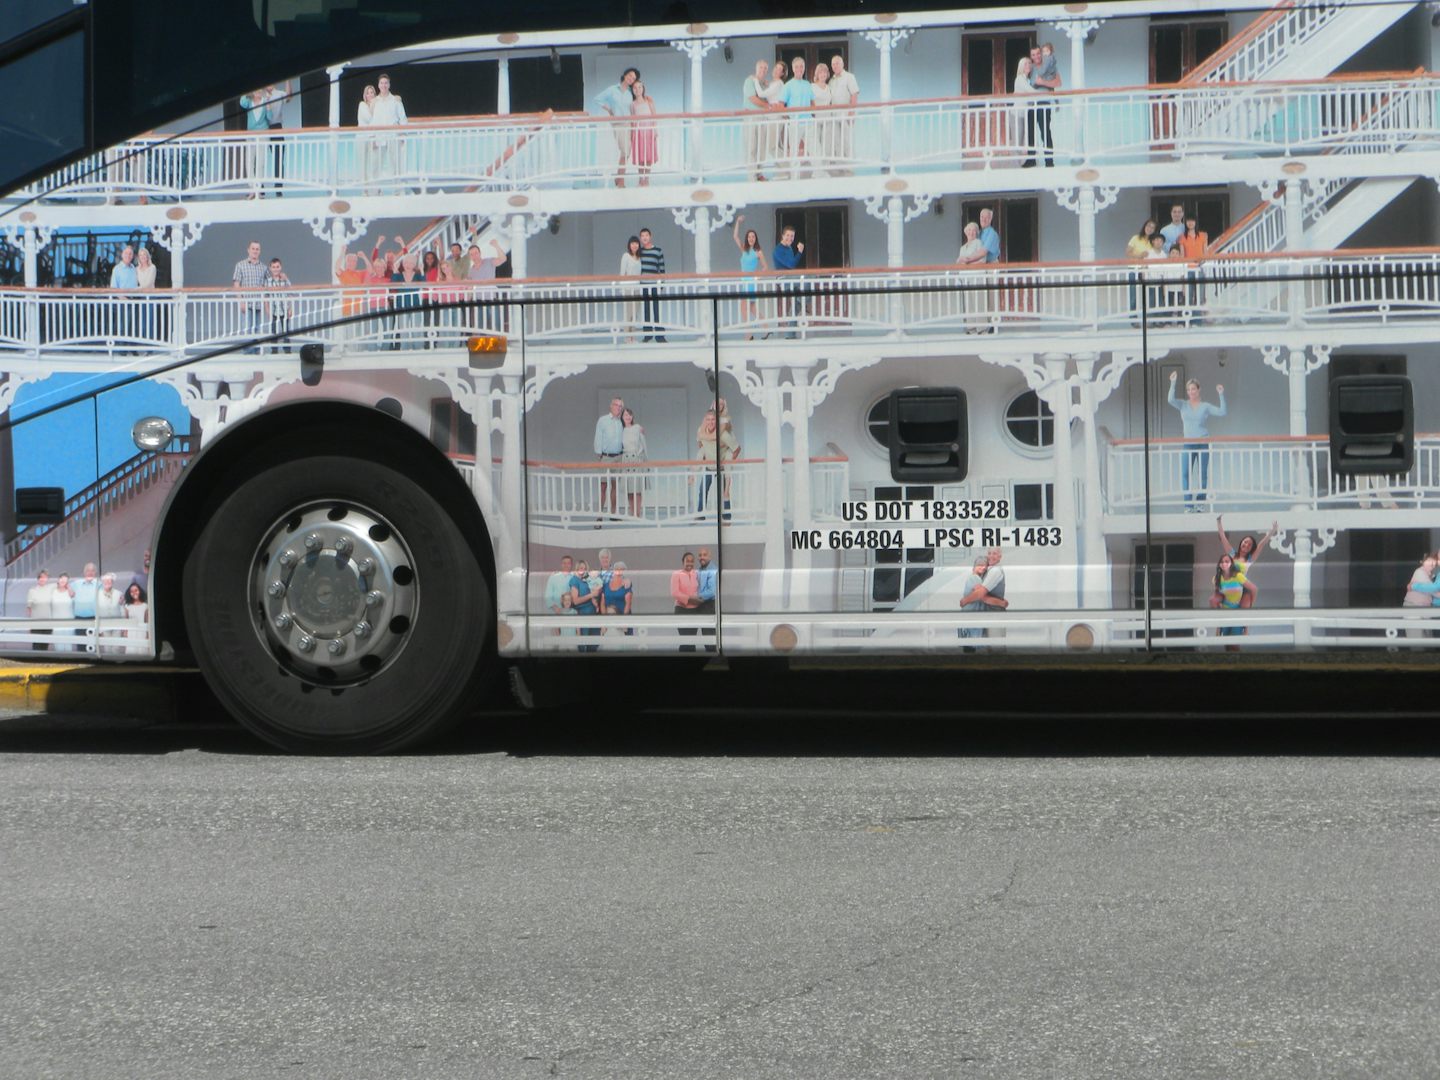 Hop-on-Hop-off bus painted in riverboat scheme